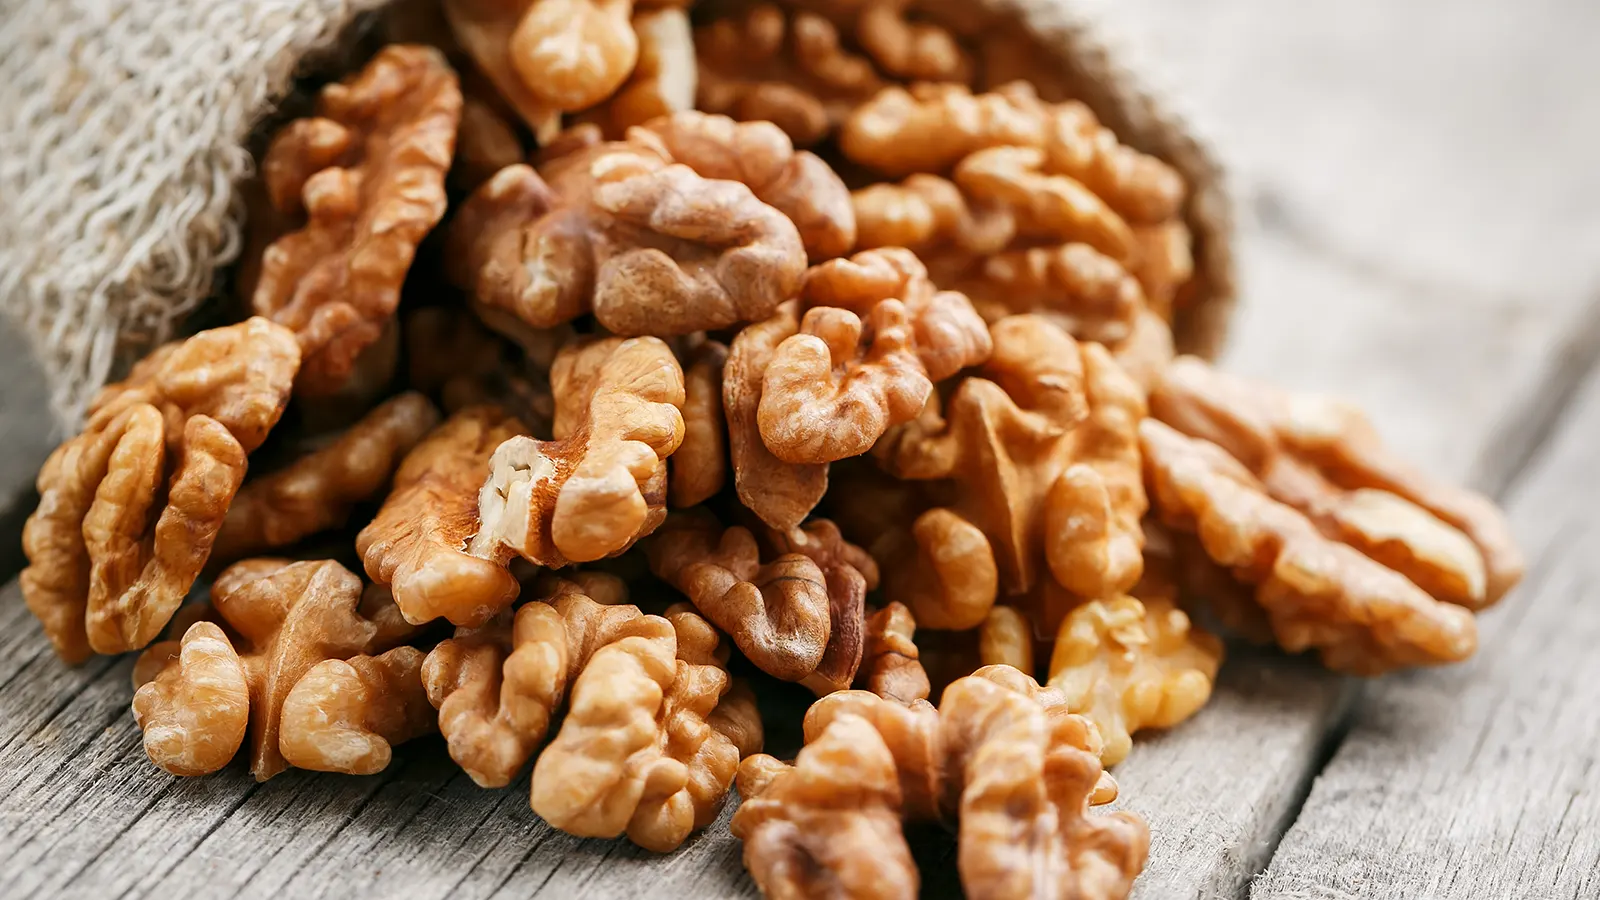 What are The Benefits of Pecan Nuts?